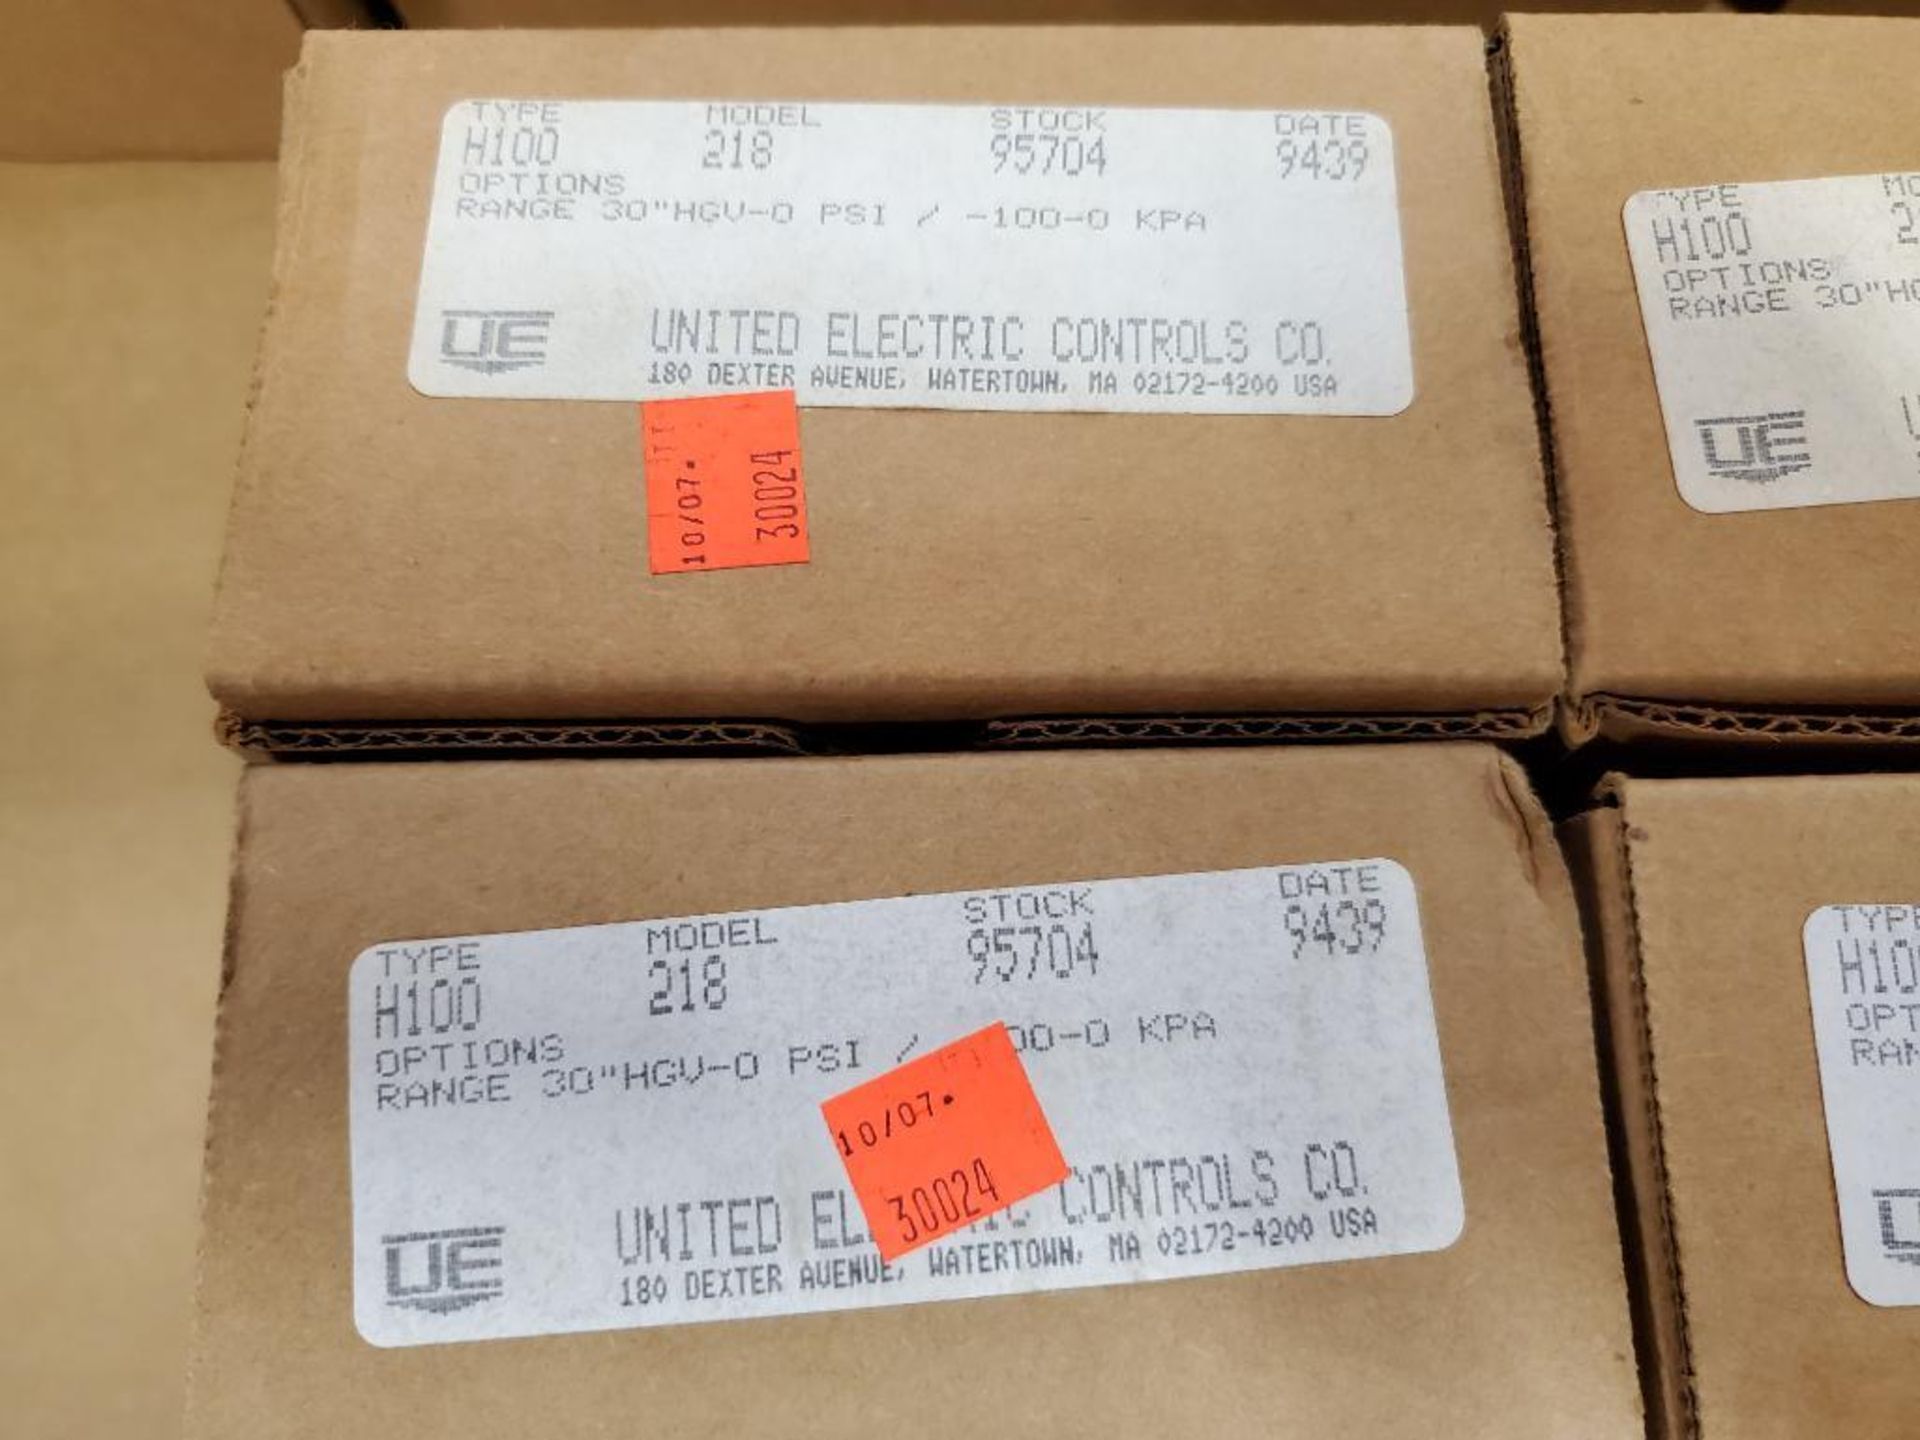 Qty 5 - United Electric controls H100 Model 218 gage. 30" HGV-0 PSI / -100-0 KPA. New in box. - Image 5 of 8